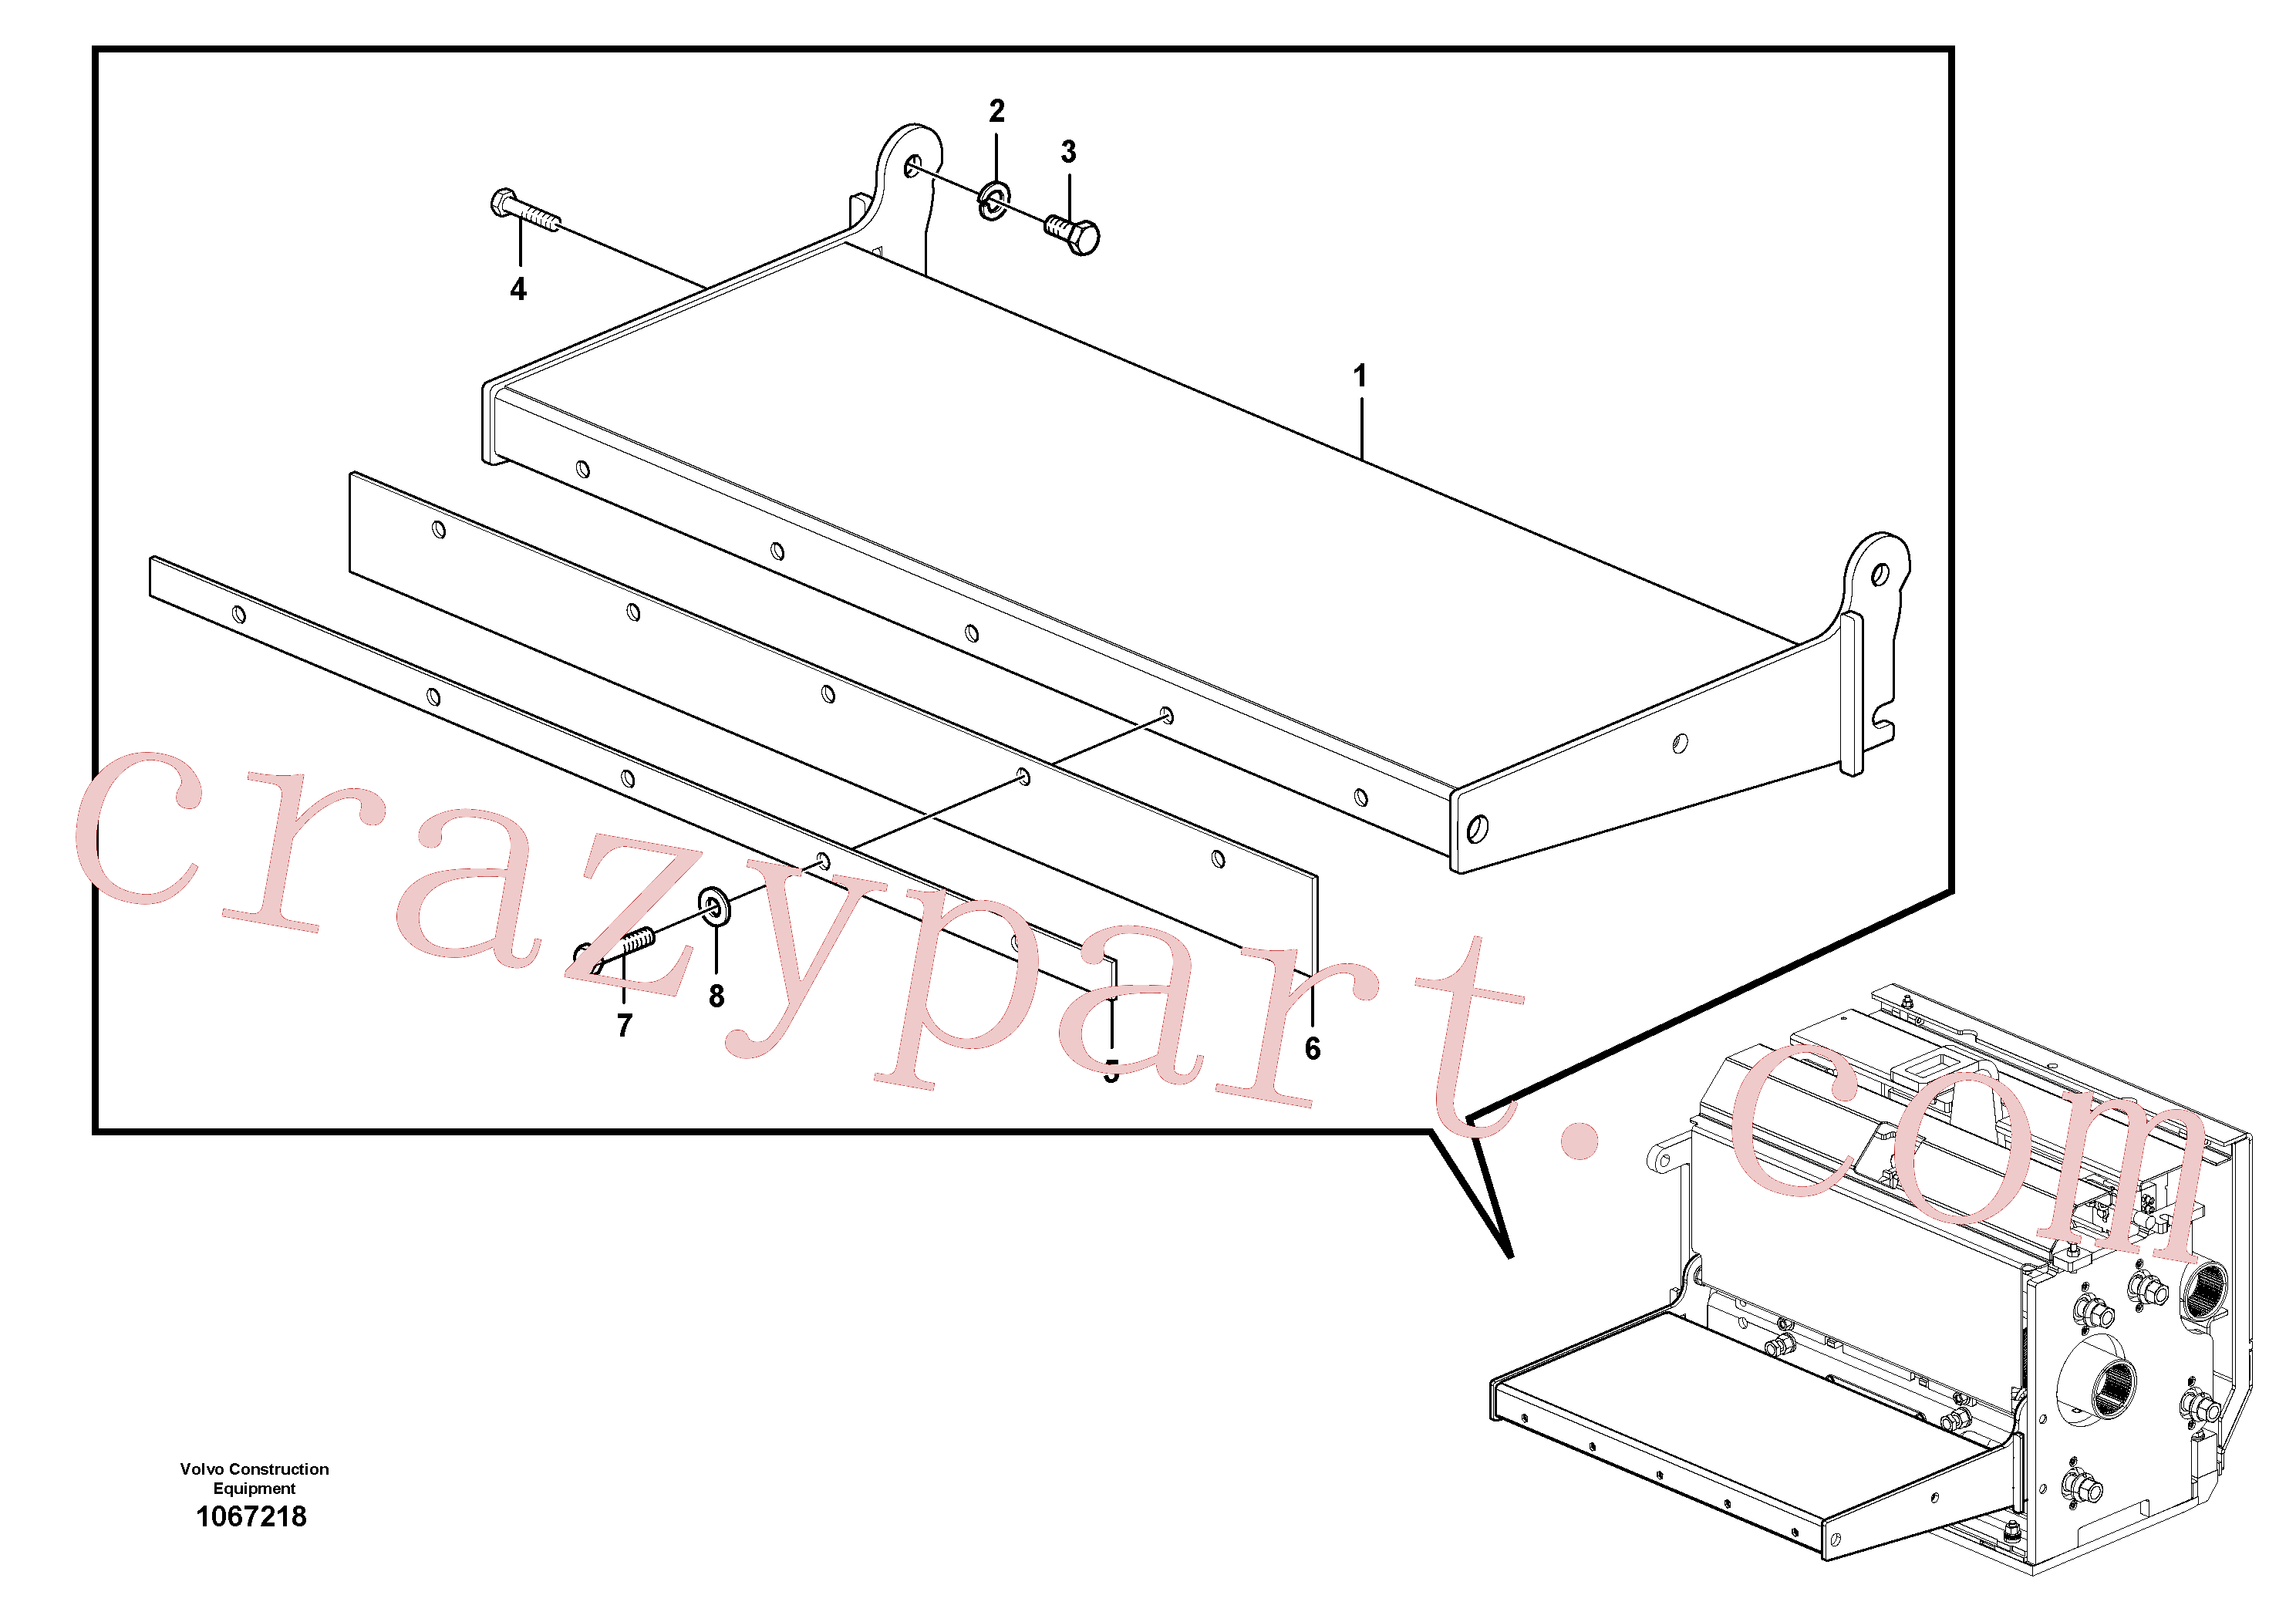 RM80765134 for Volvo Catwalk(1067218 assembly)